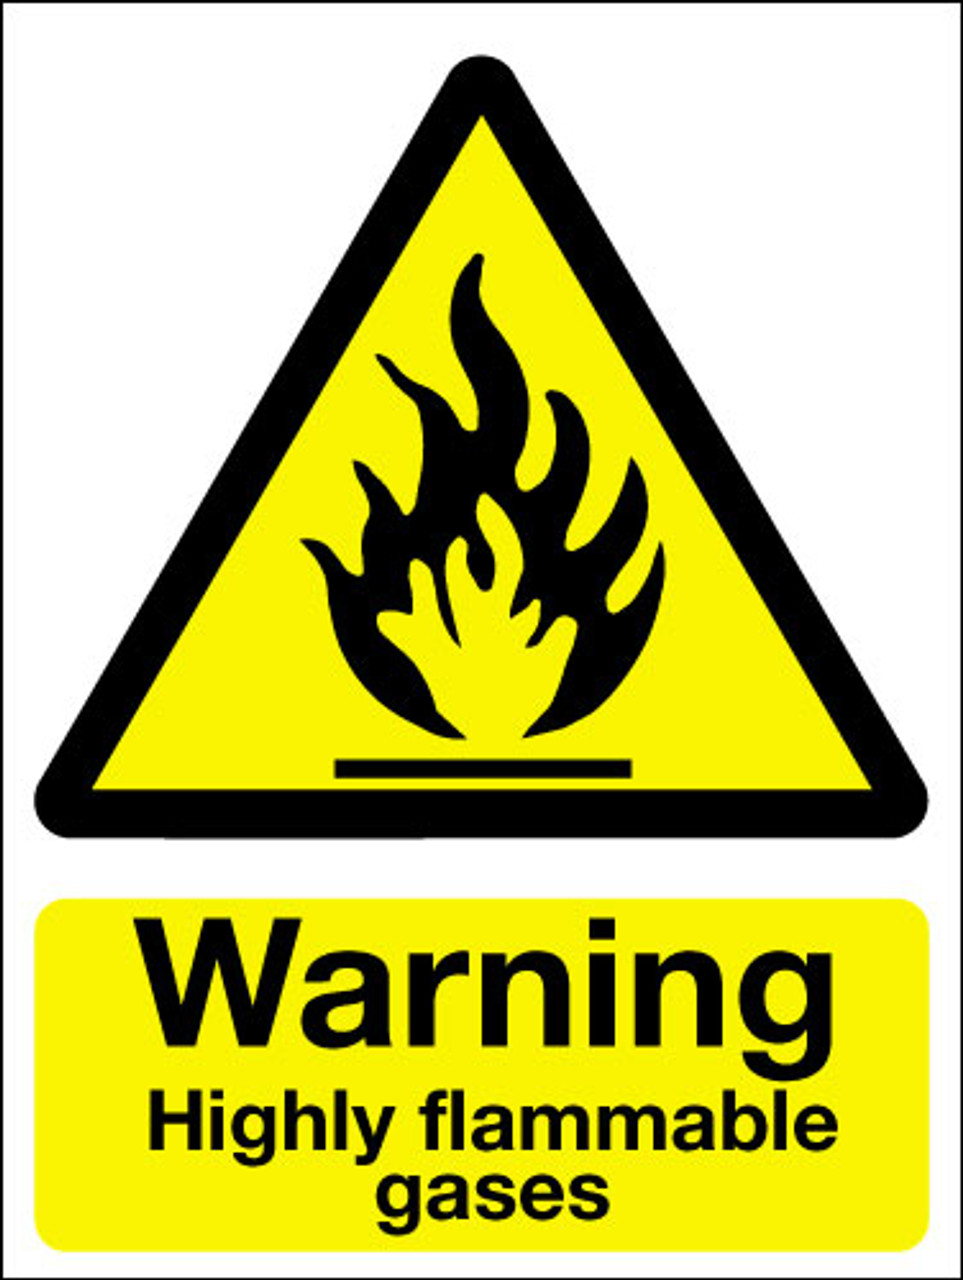 Warning highly flammable gasses sign